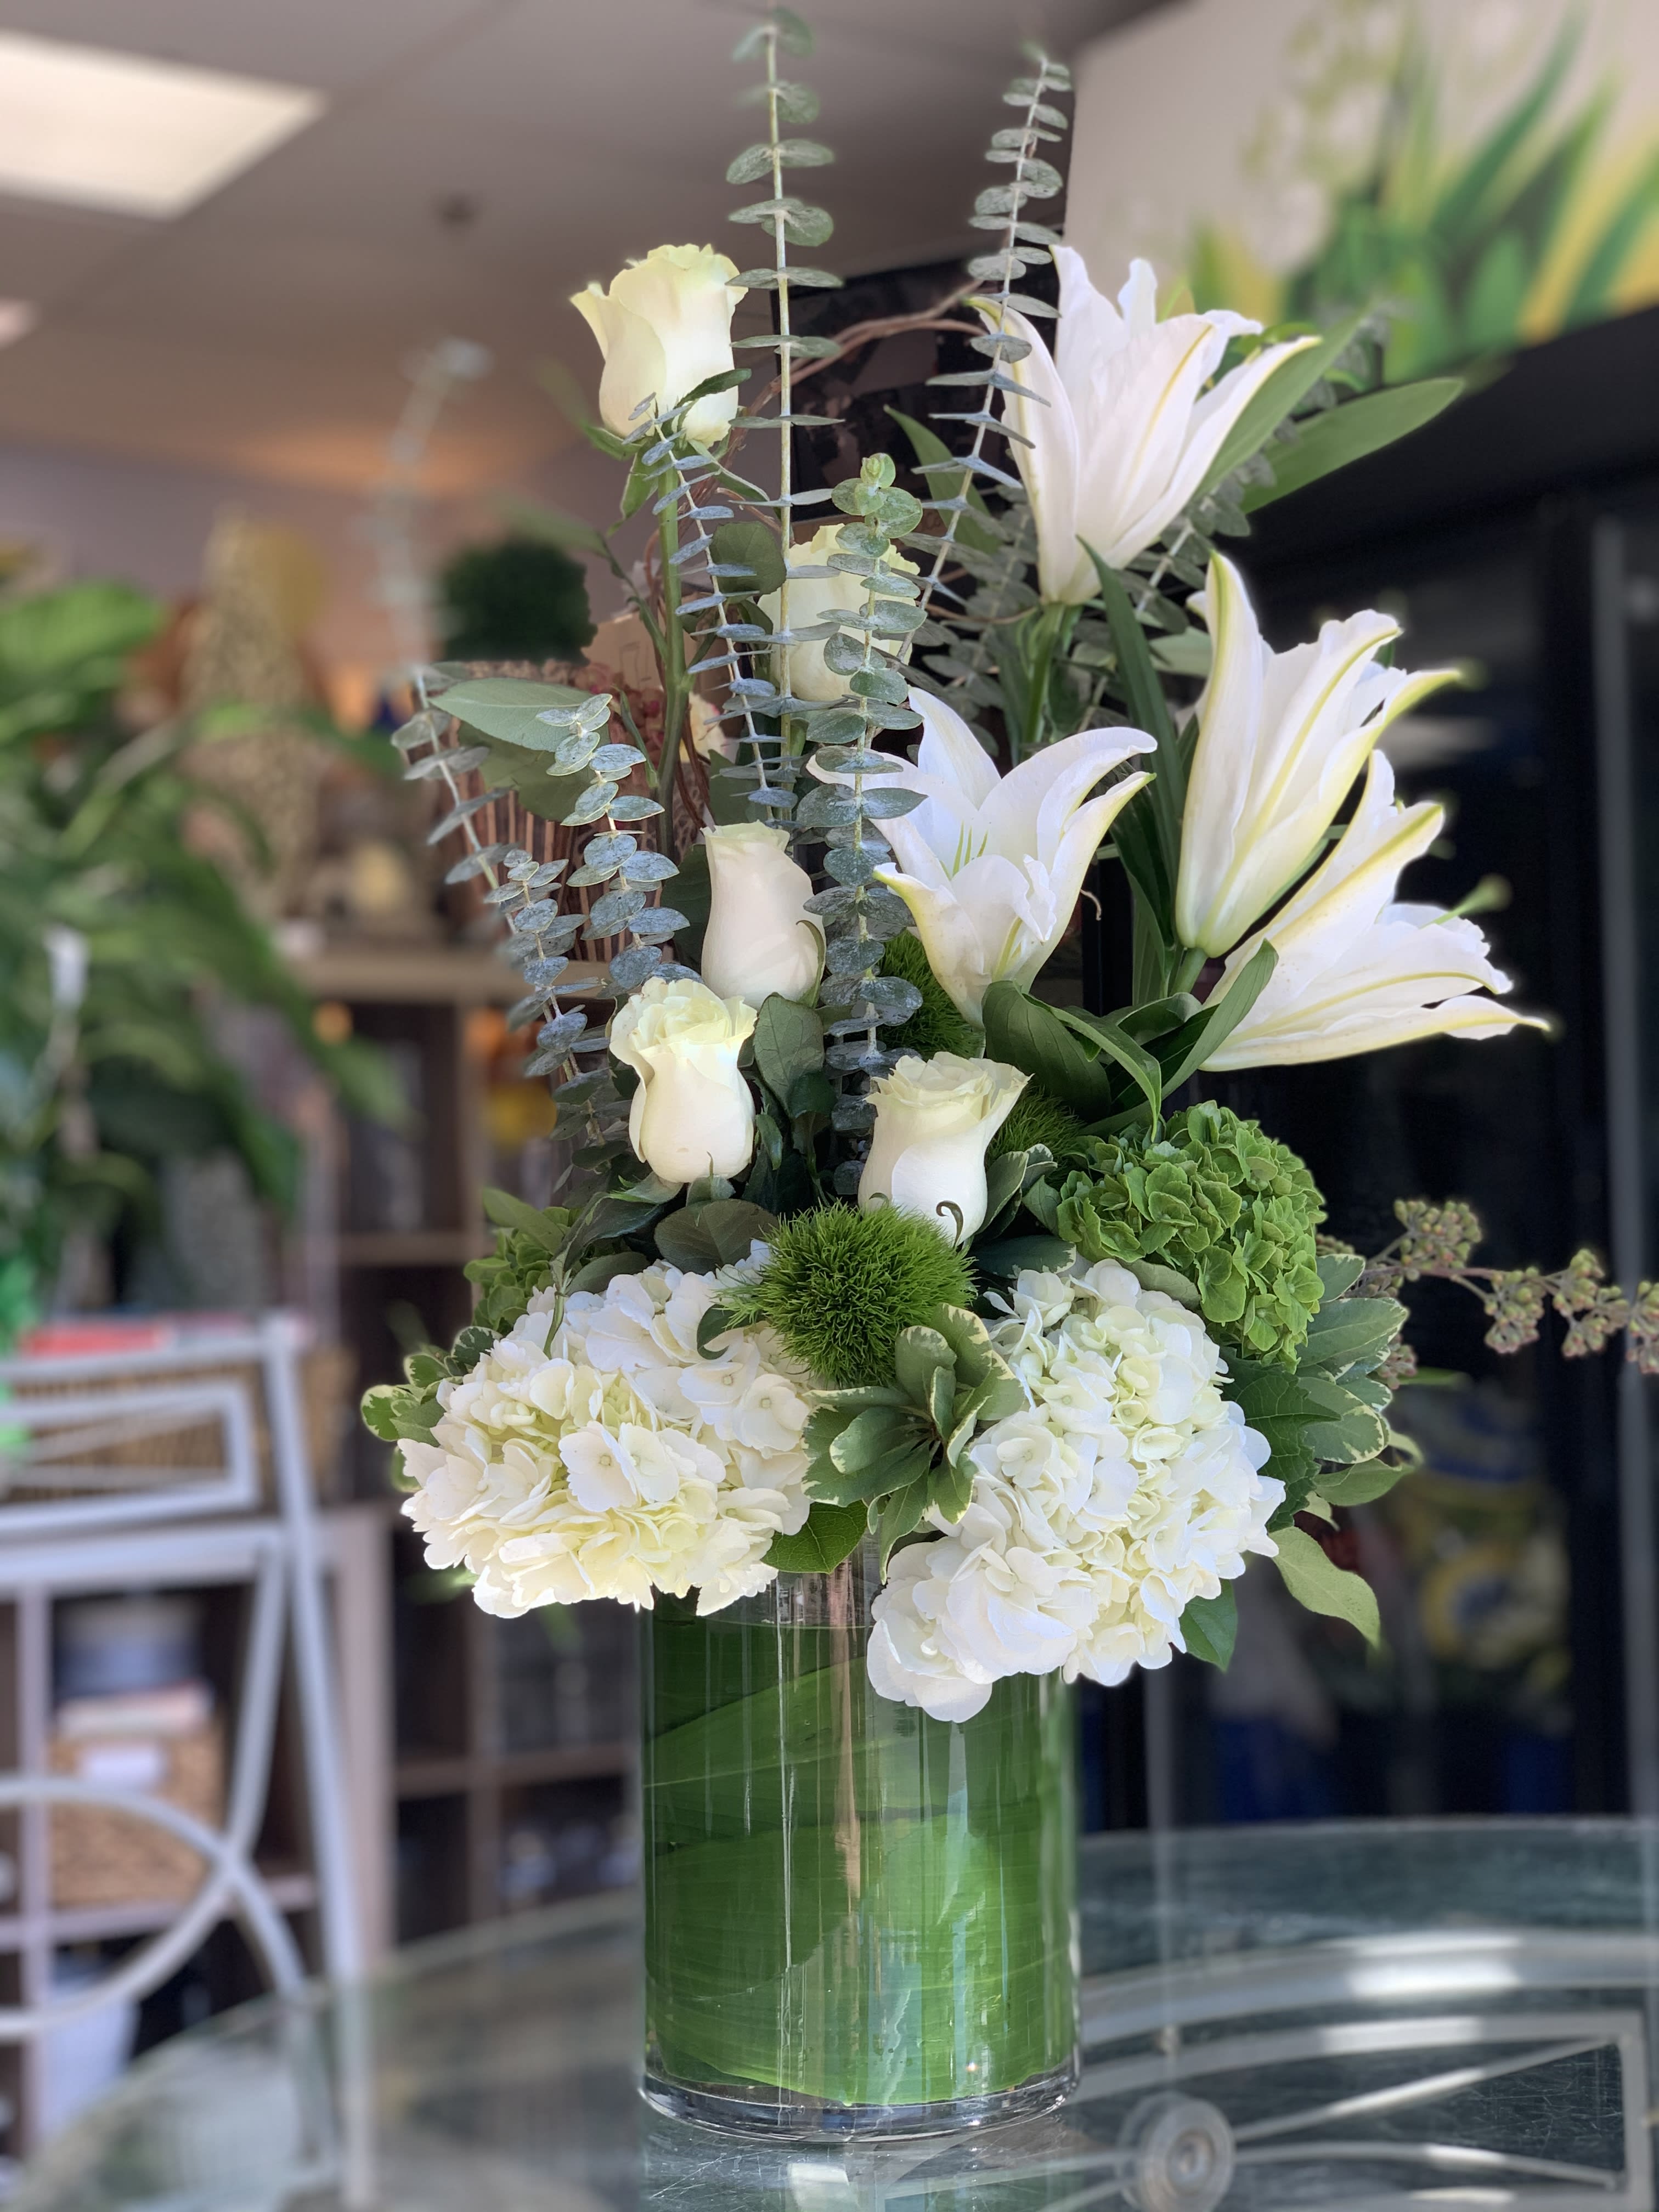 Vienna's Botanical Beauty - A modern accent for any occasion, this beautiful botanical blends with white and green hydrangea, white roses and lilies with unique greens for a peaceful, Eastern-inspired feel